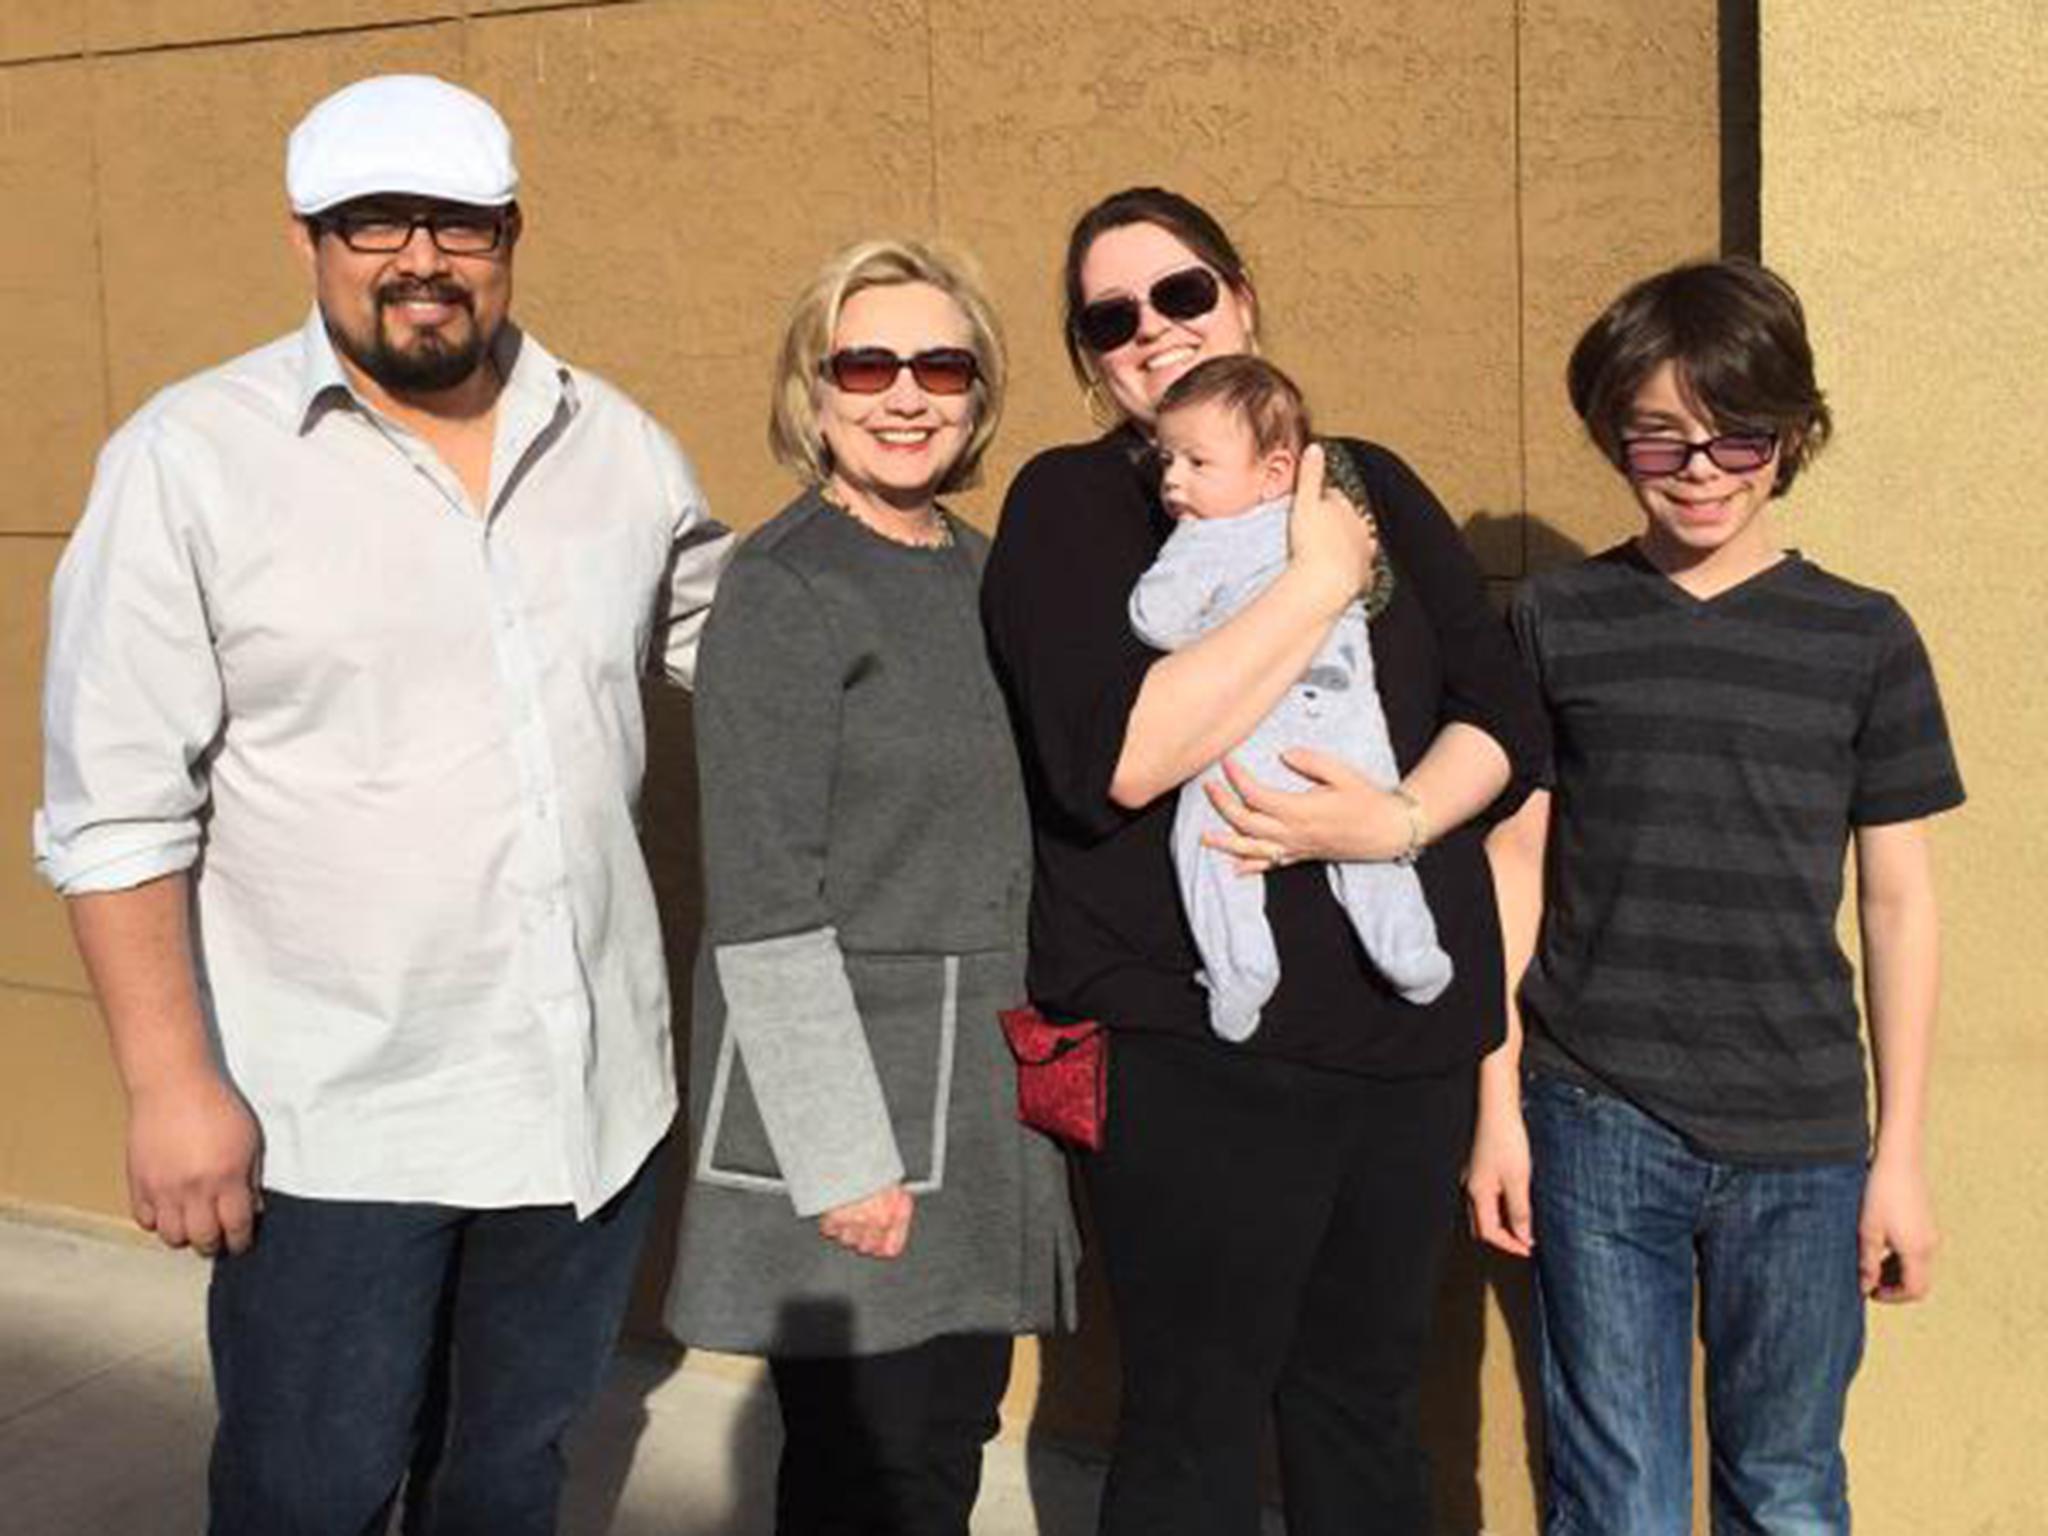 A picture of one family Hillary Clinton, second from left, met on her road trip, which she tweeted